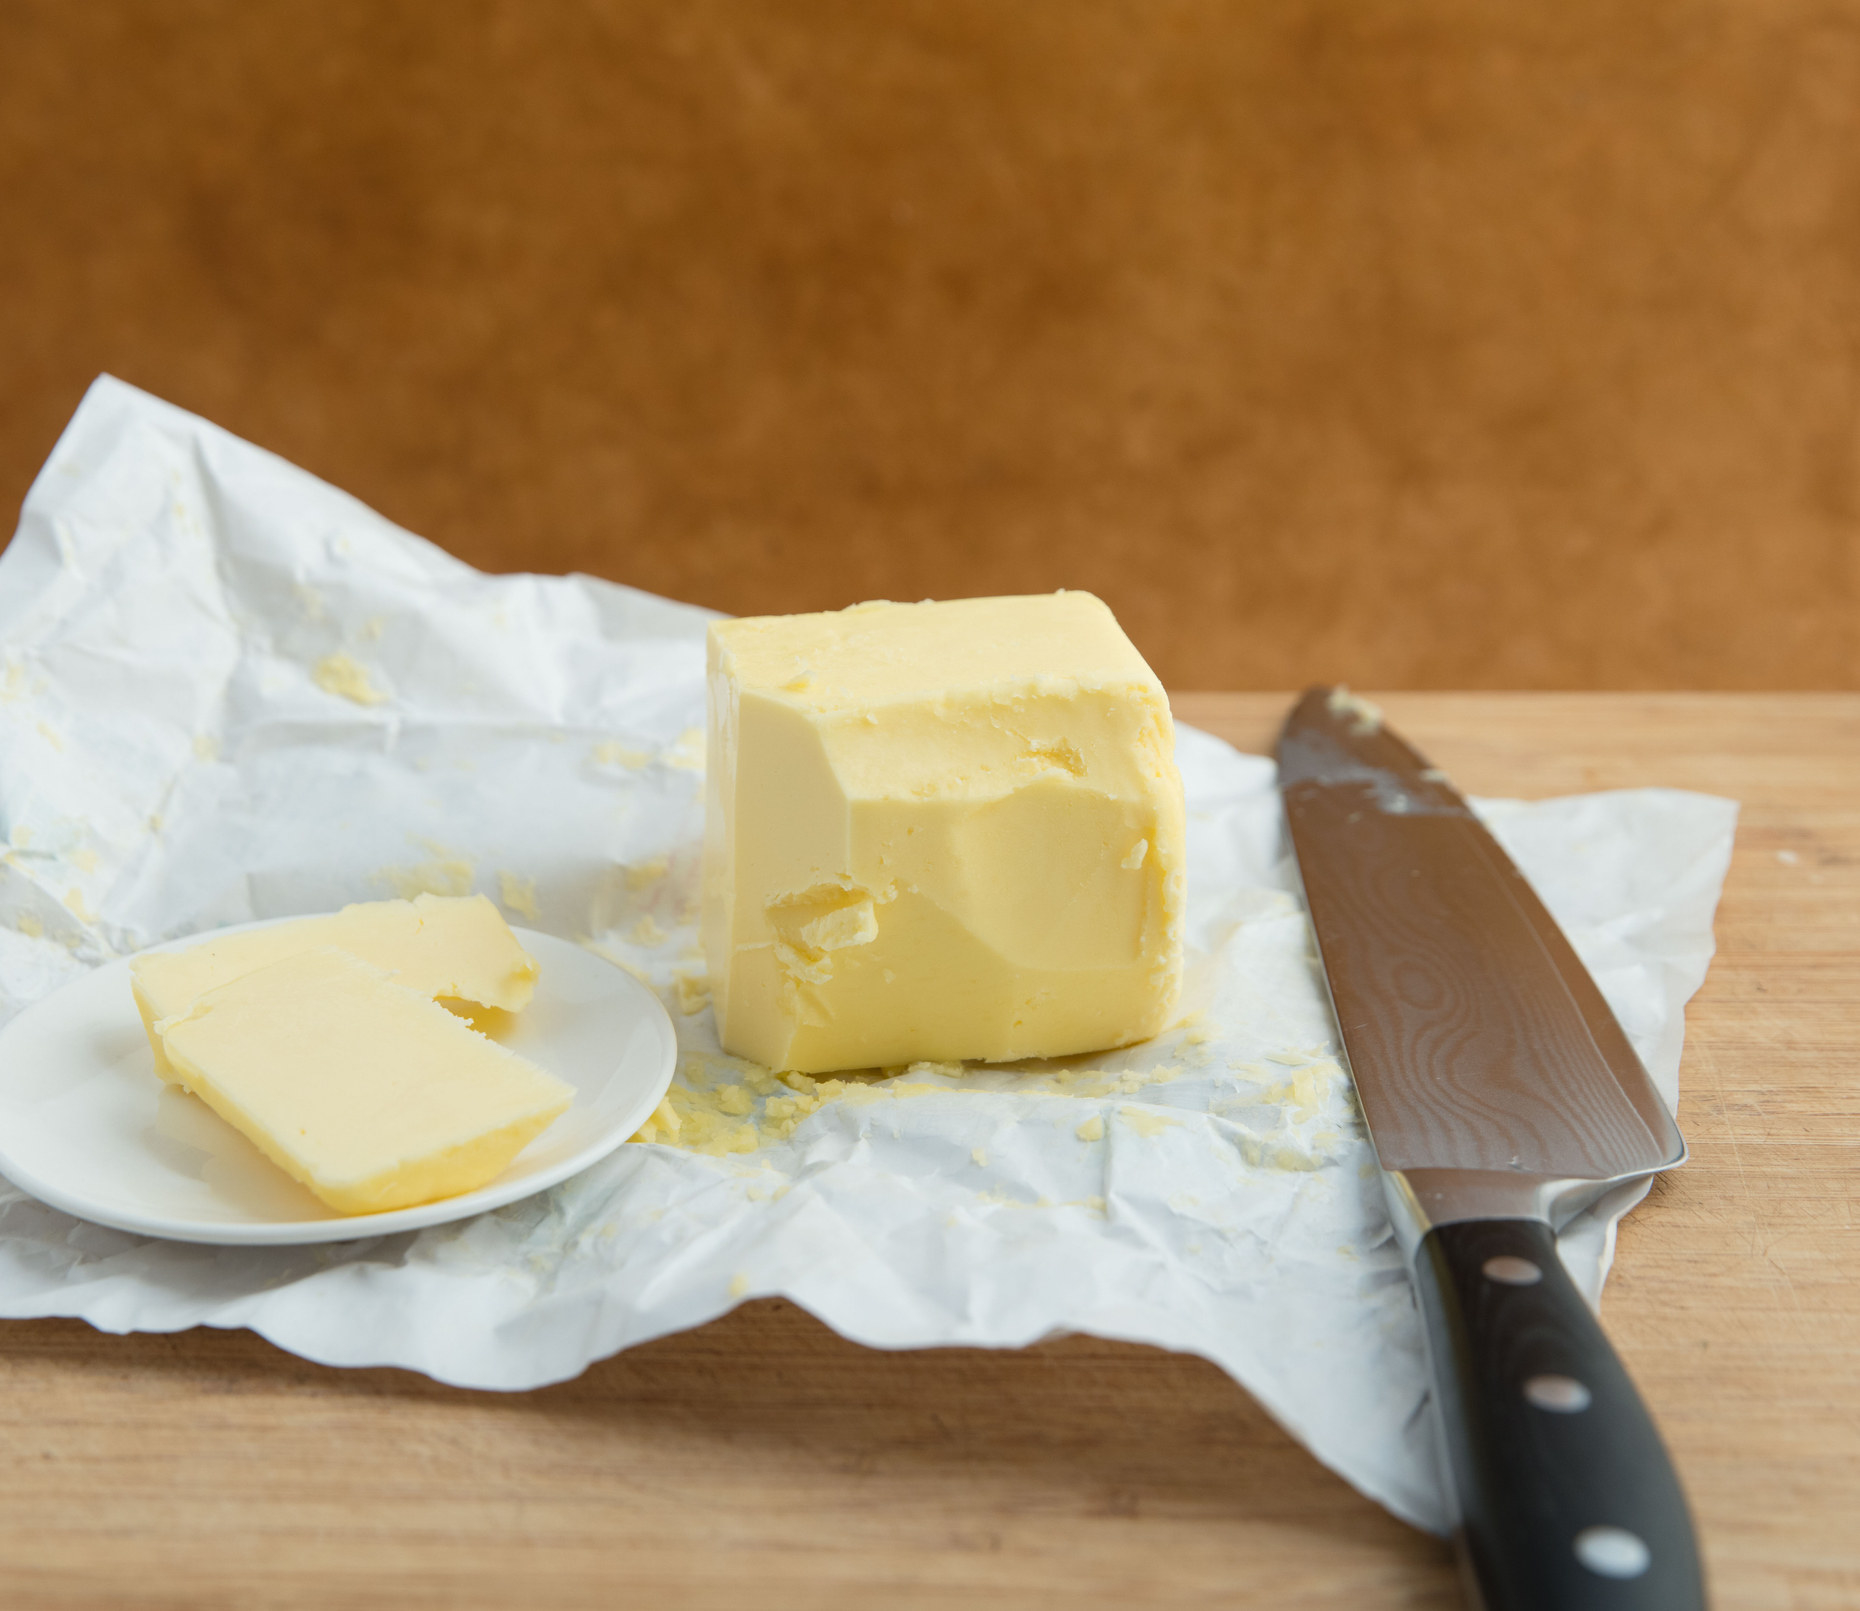 A stick of butter on a counter